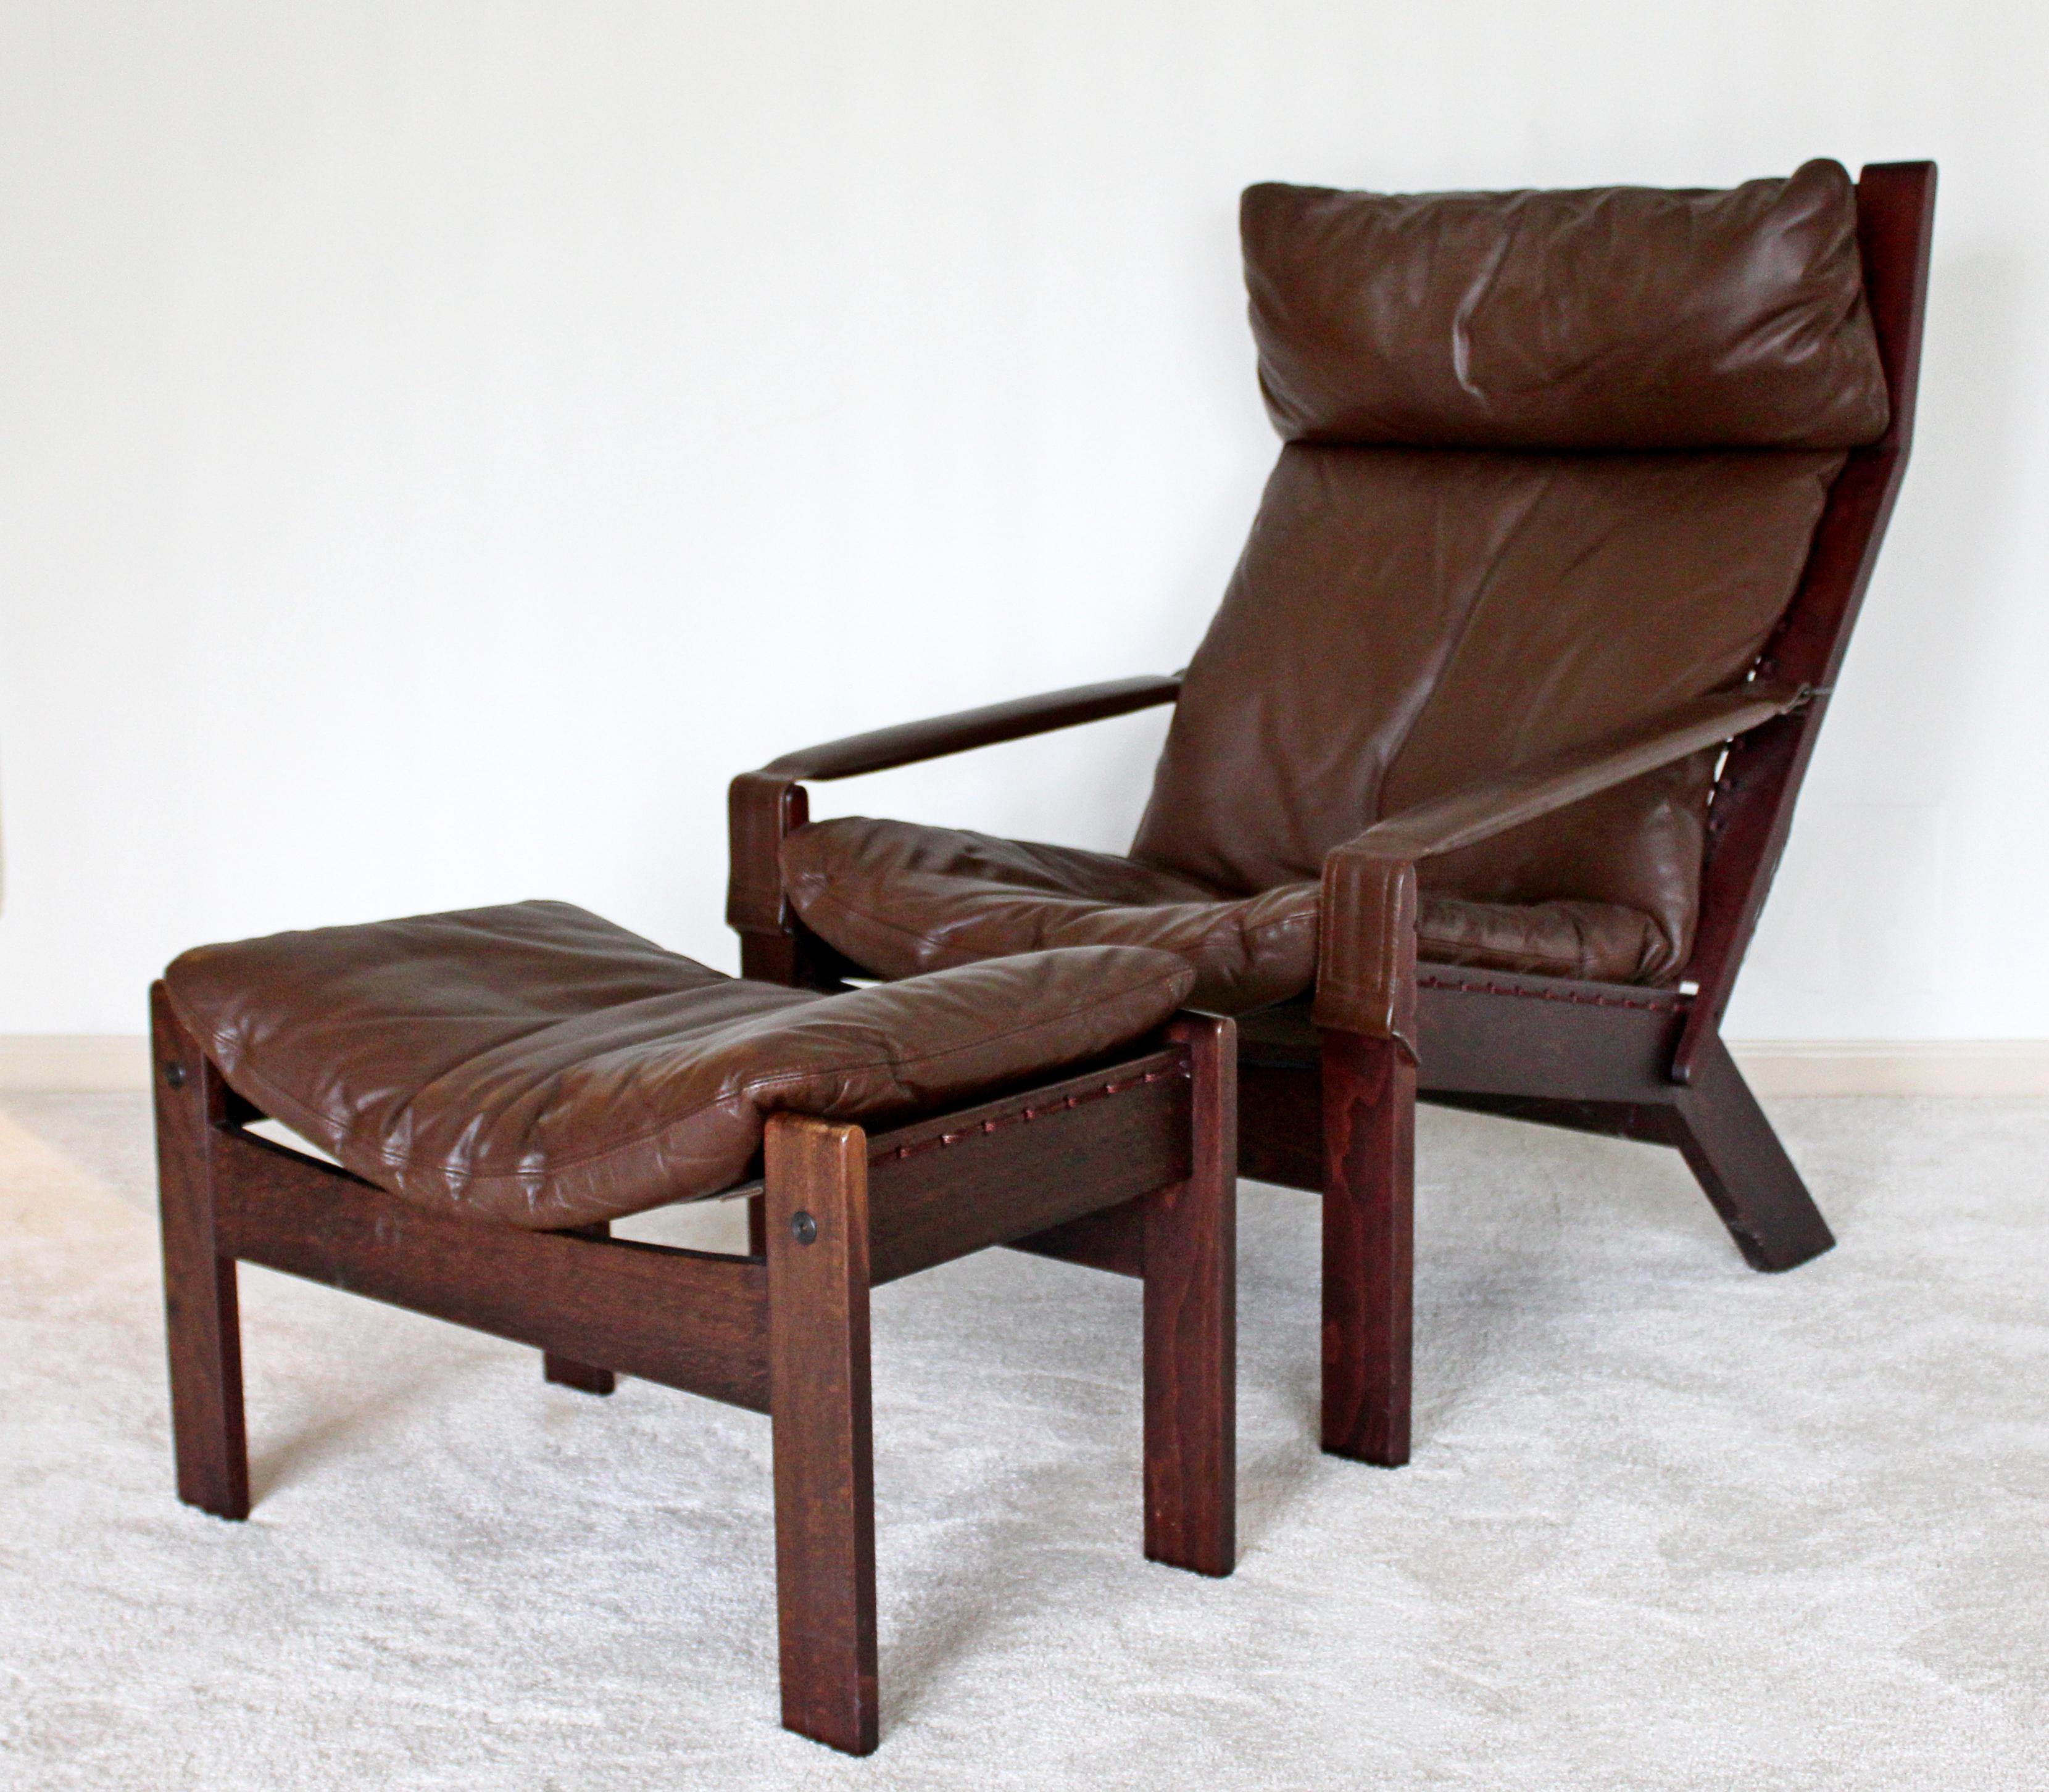 For your consideration are a marvelous, sculptural lounge armchair and matching ottoman, with a brown leather upholstery, by Westnofa, made in Norway, circa the 1960s. In very good condition. The dimensions of the chair are 26